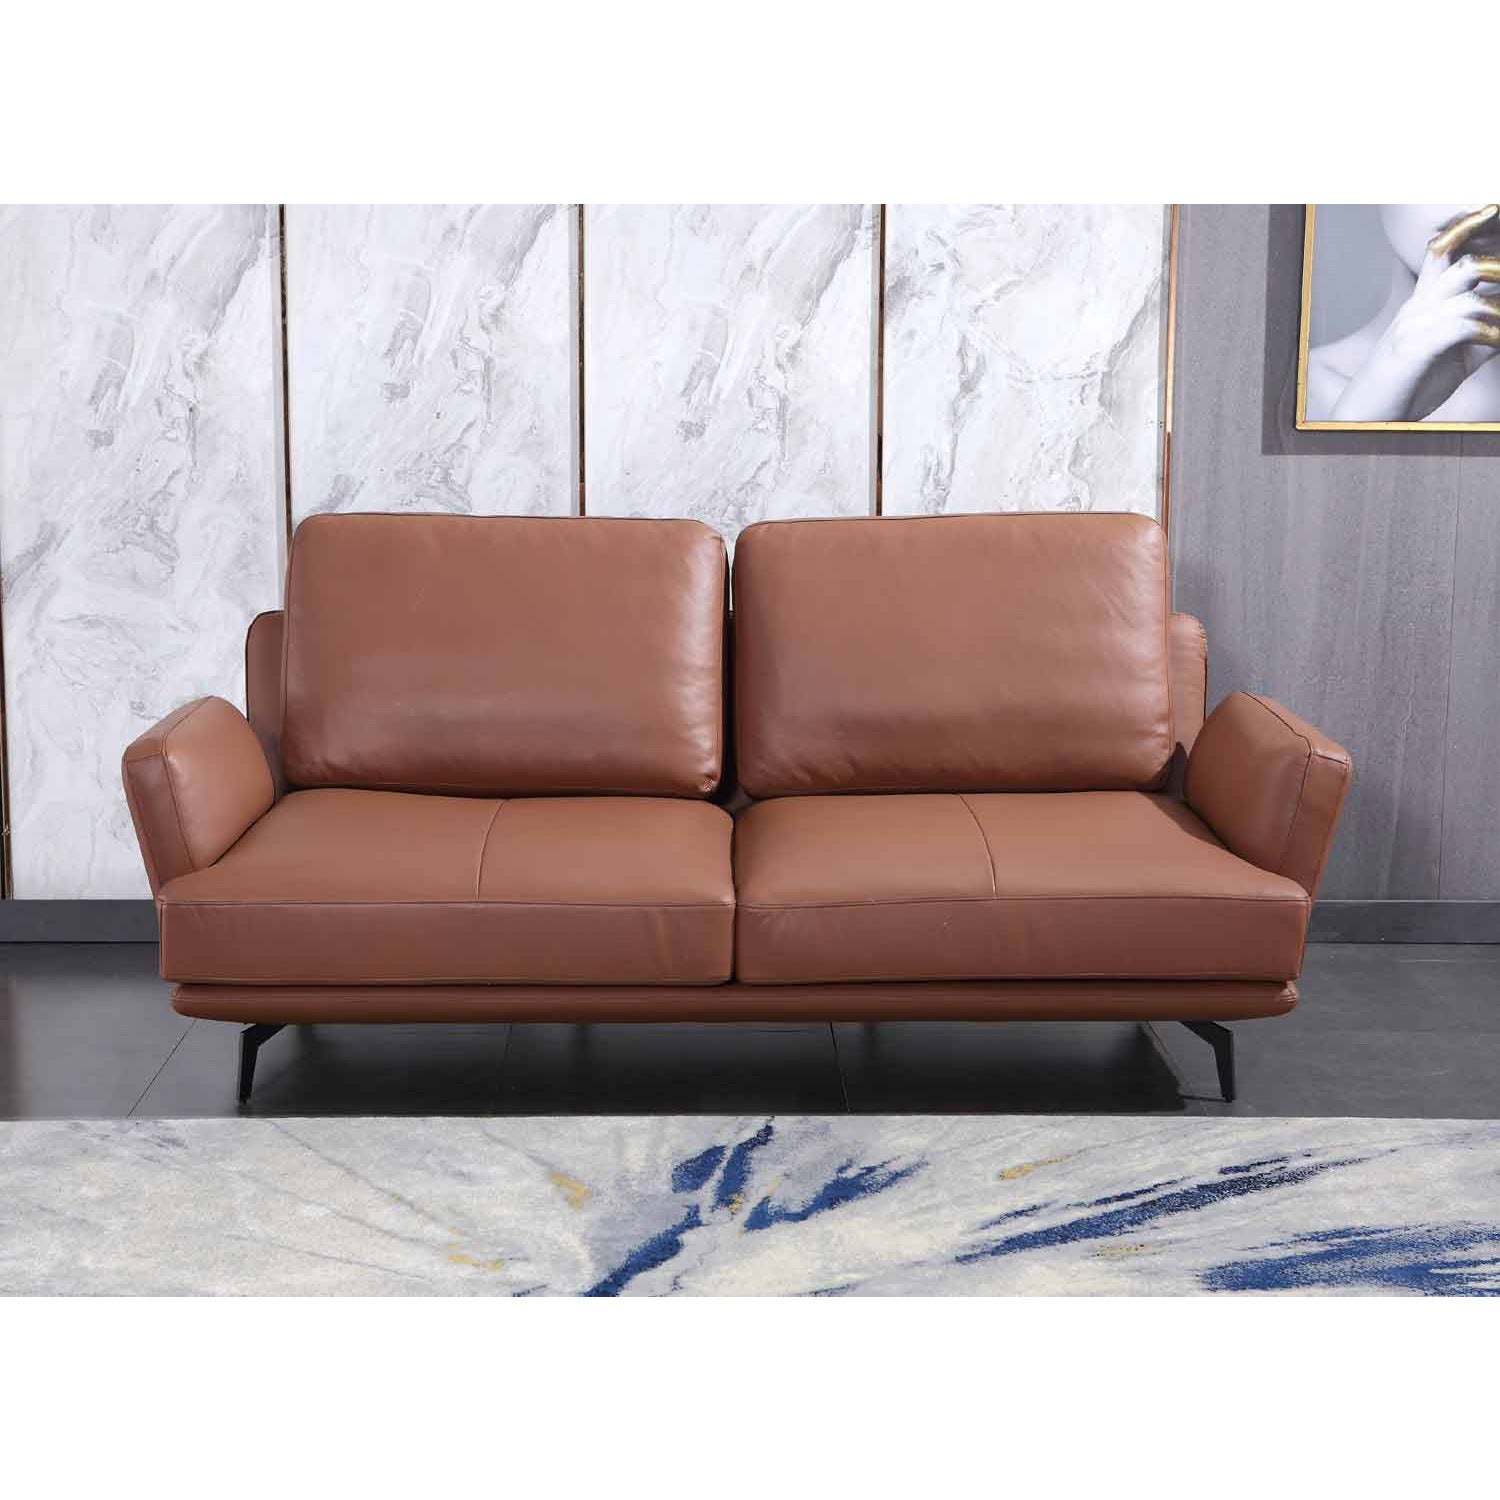 European Furniture - Tratto Loveseat in Russet Brown - 37455-L - New Star Living